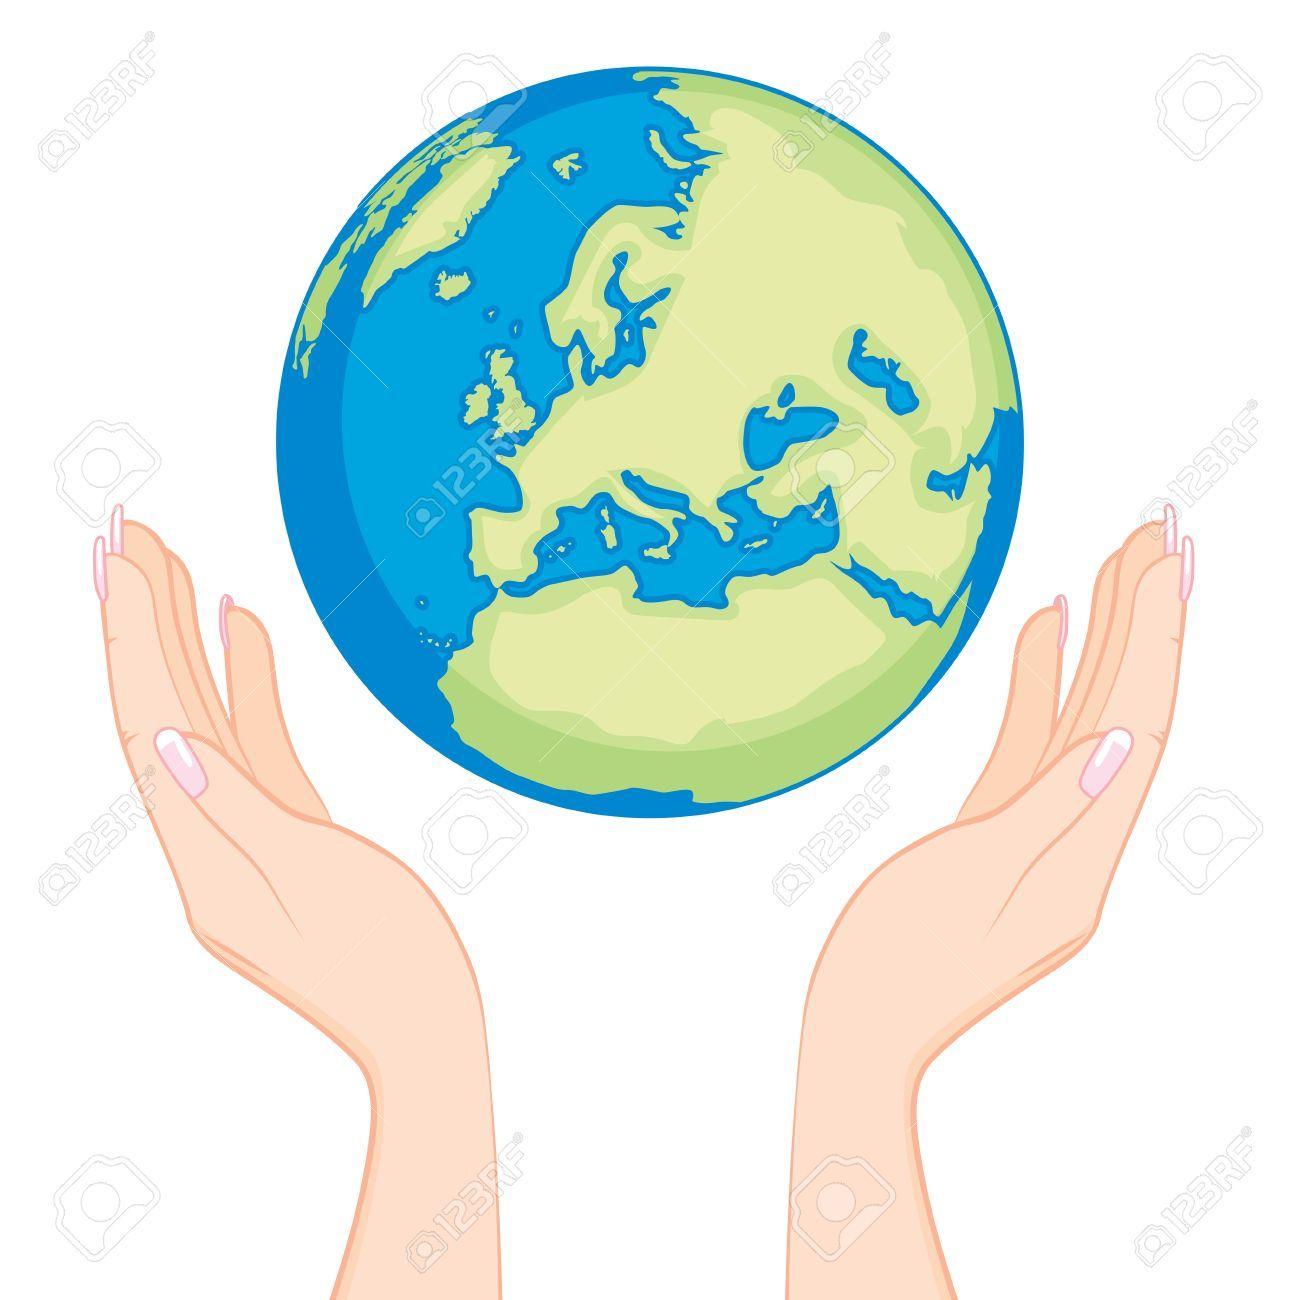 Hands Holding Globe Logo - Hand Holding Globe Clipart | Great free clipart, silhouette ...